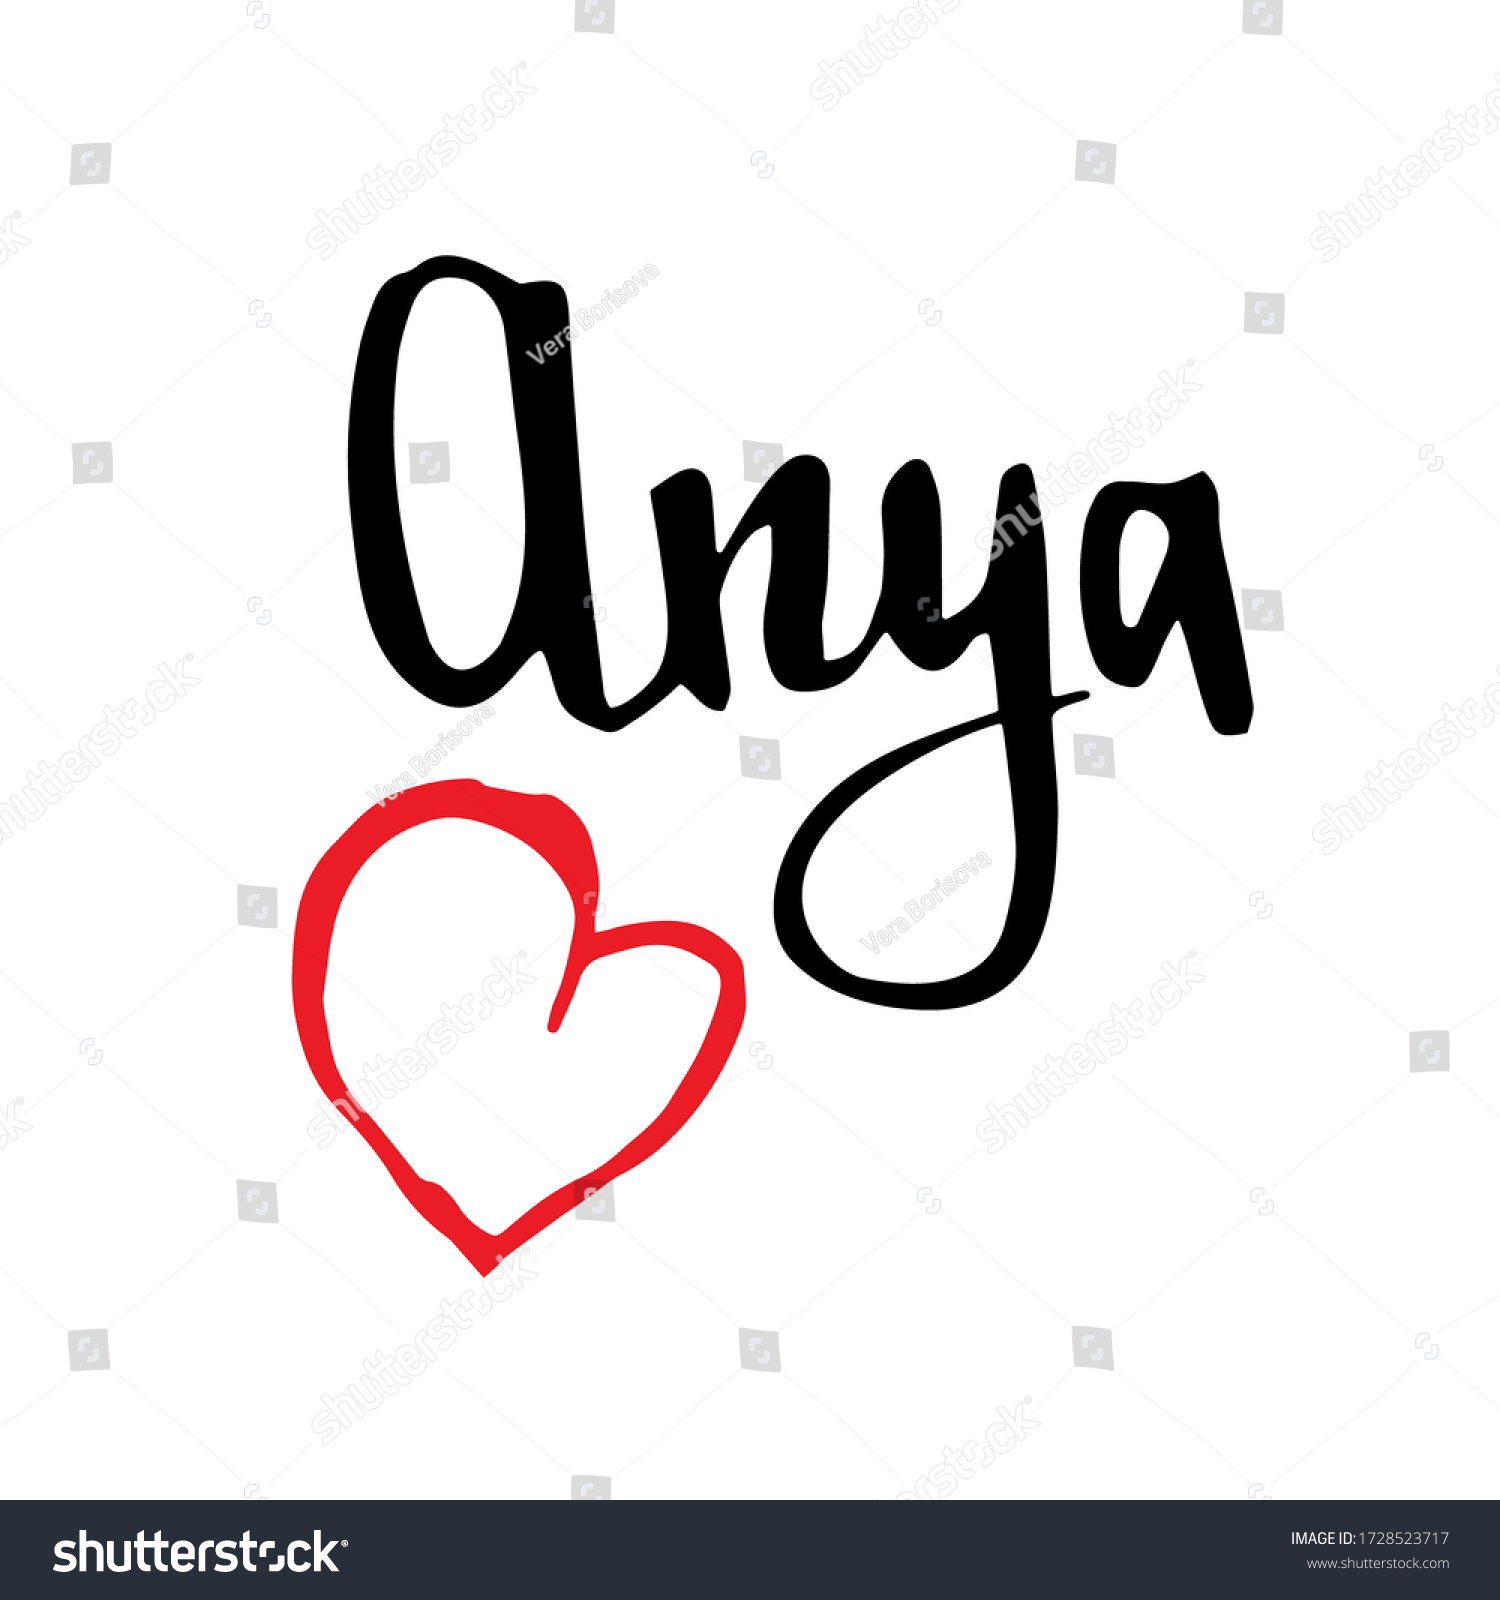 SVG of Female name Anya. Hand drawn vector girl name. Drawn by brush words for poster, textile, card, banner, marketing, billboard. svg